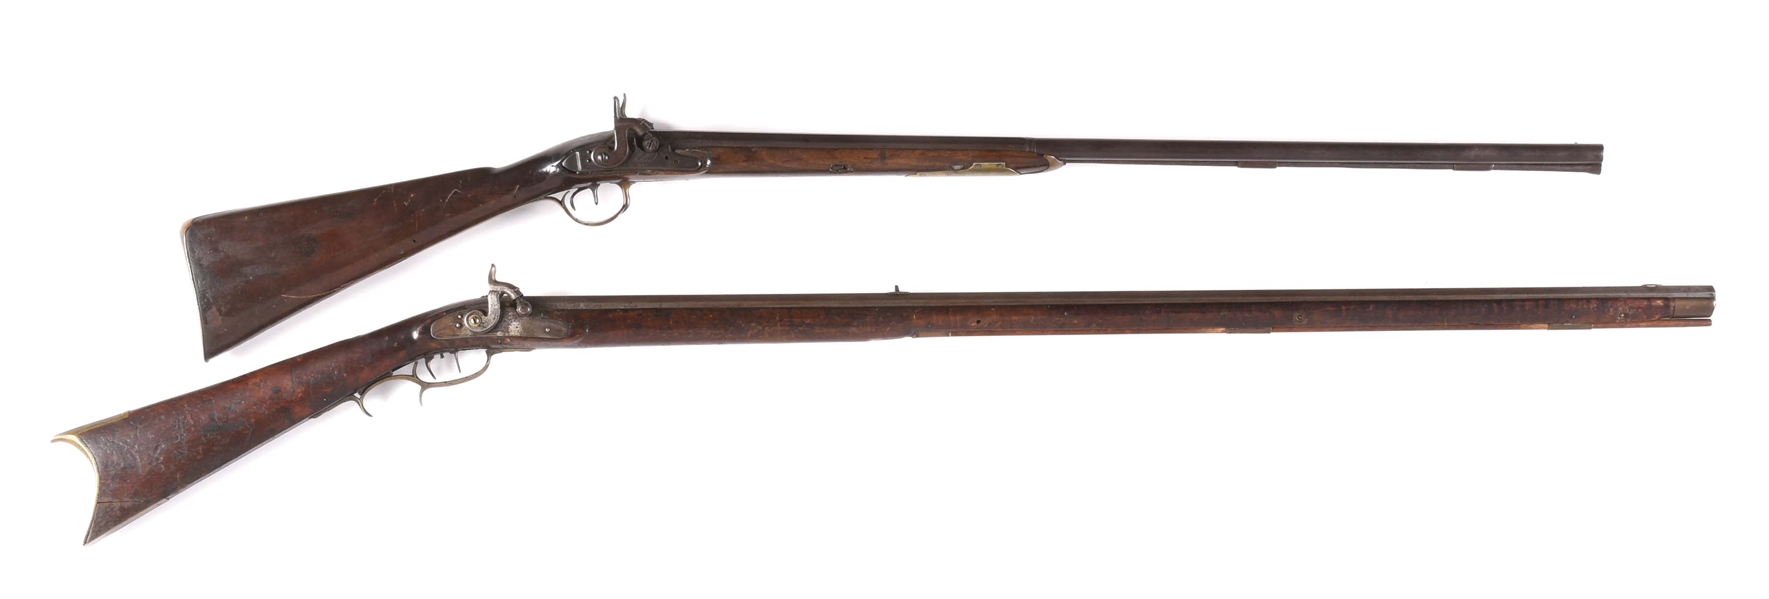 (A) LOT OF 2: KETLAND MARKED PERCUSSION SHOTGUN AND BEDFORD STYLE PERCUSSION KENTUCKY RIFLE.